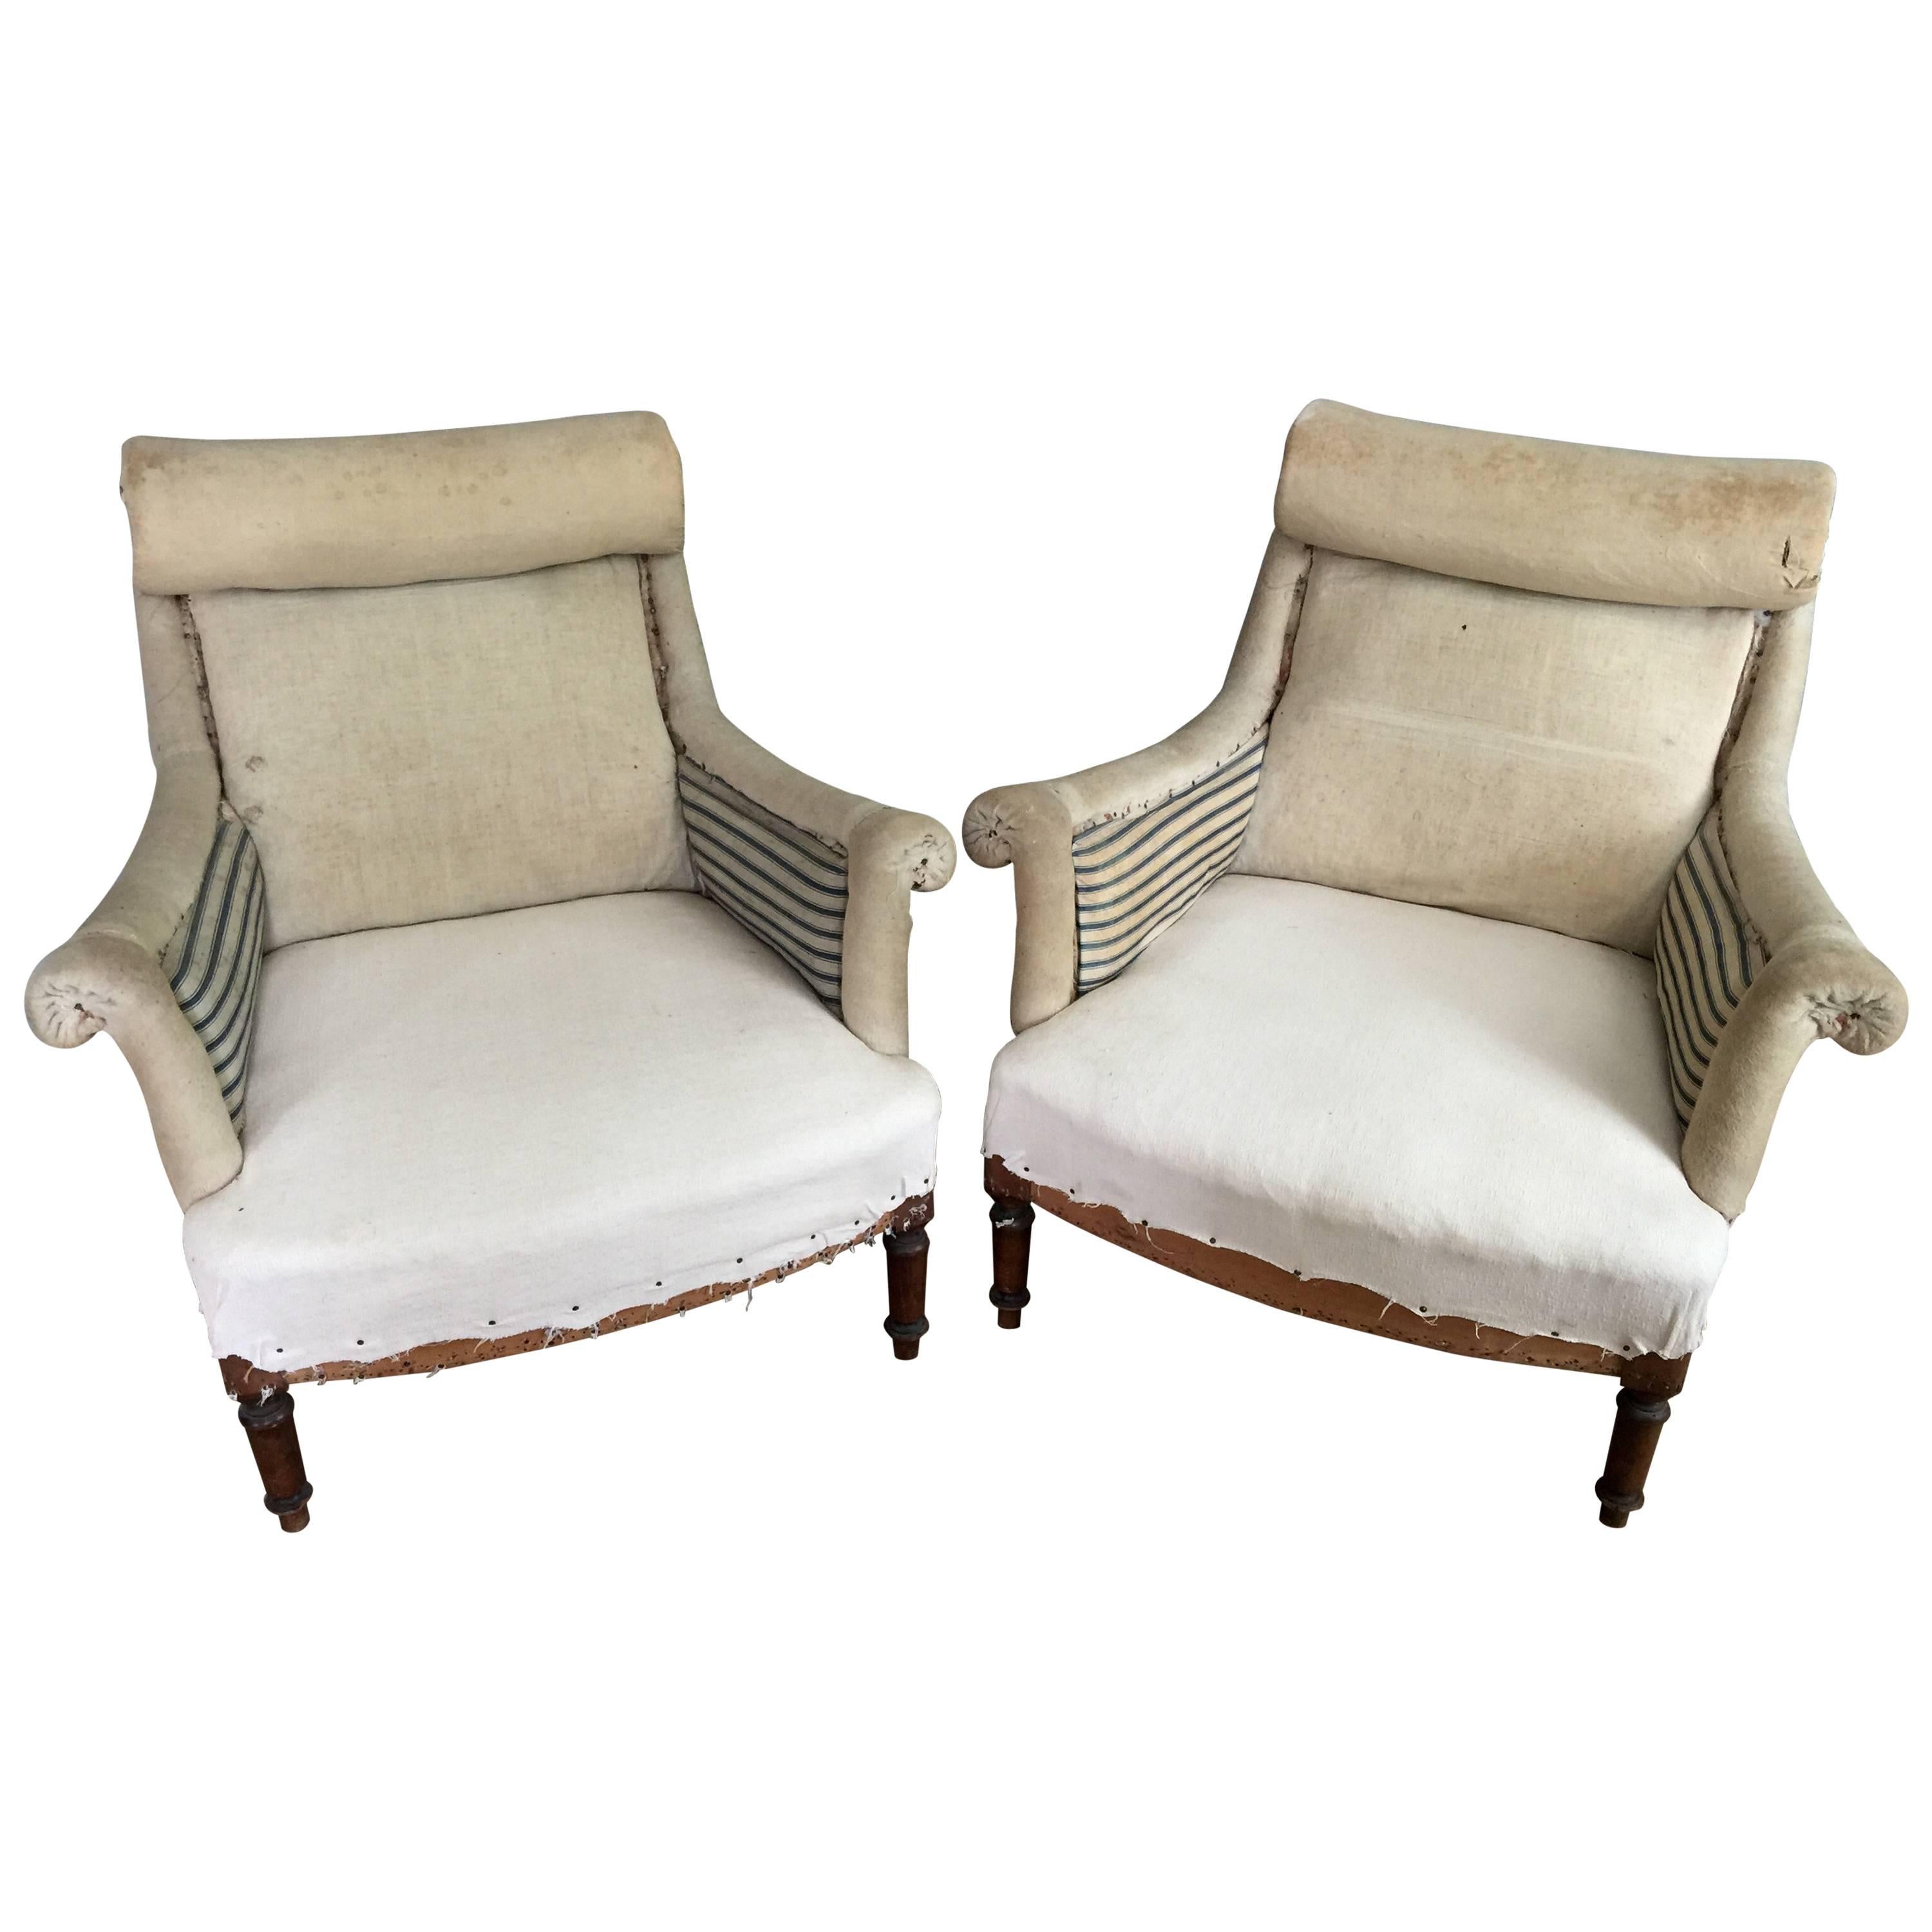 Pair of Scroll Top French Salon Chairs